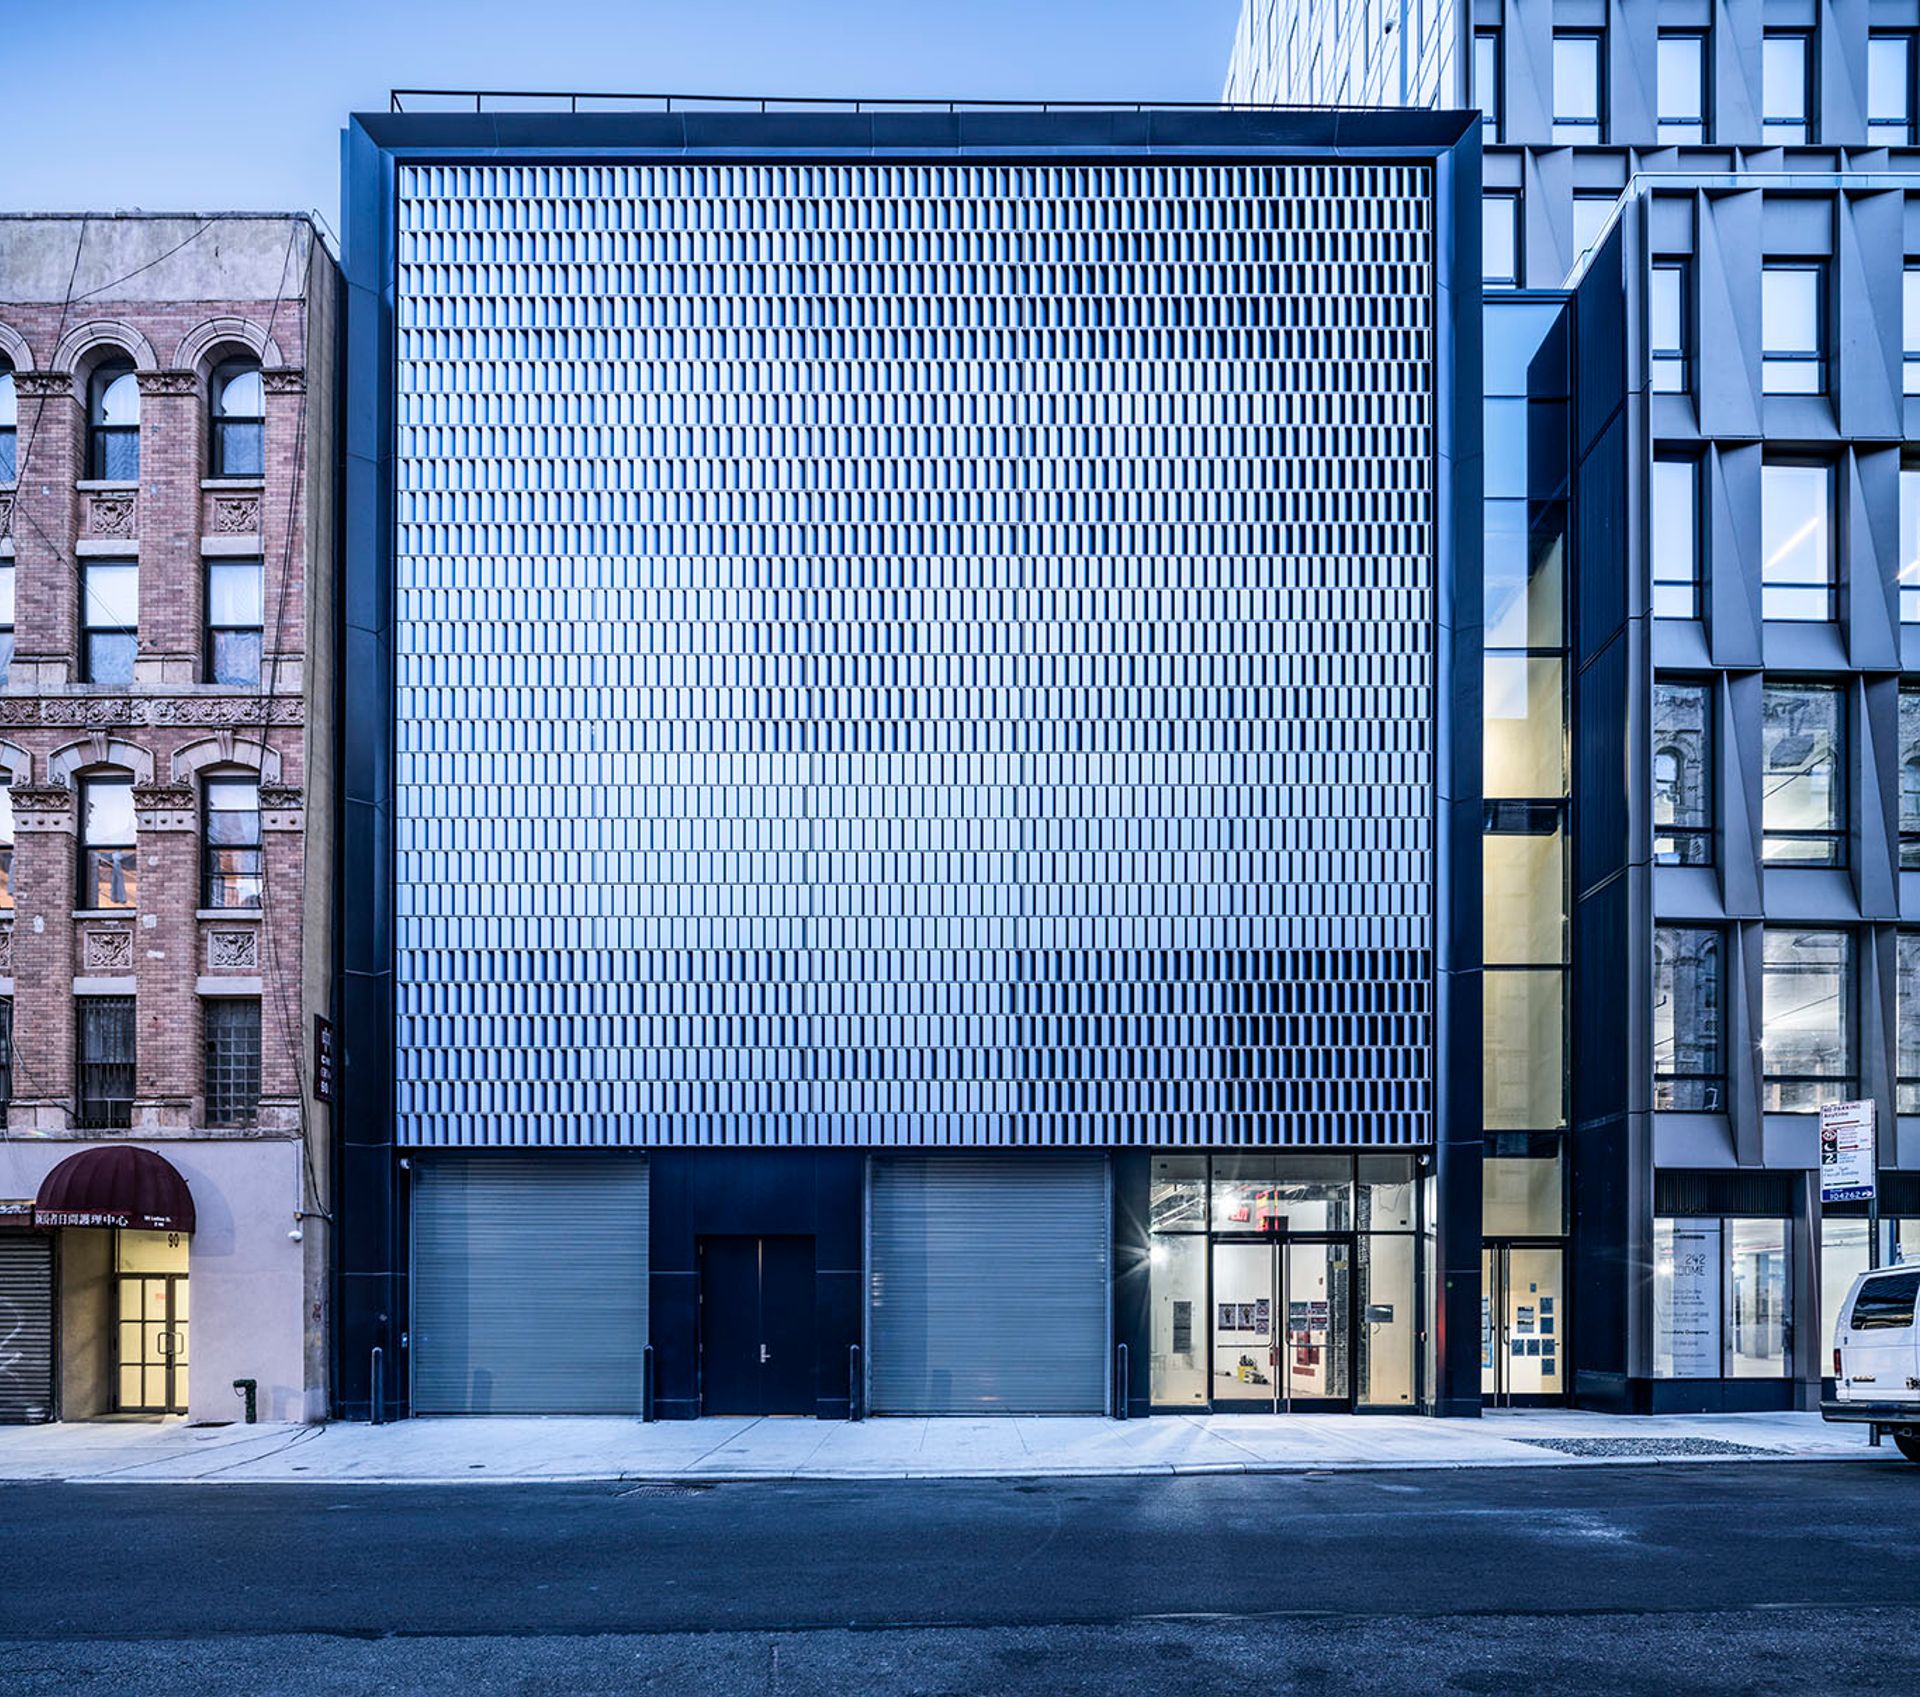 The International Center of Photography's new home on the Lower East Side of Manhattan Saul Metnick for the International Center of Photography